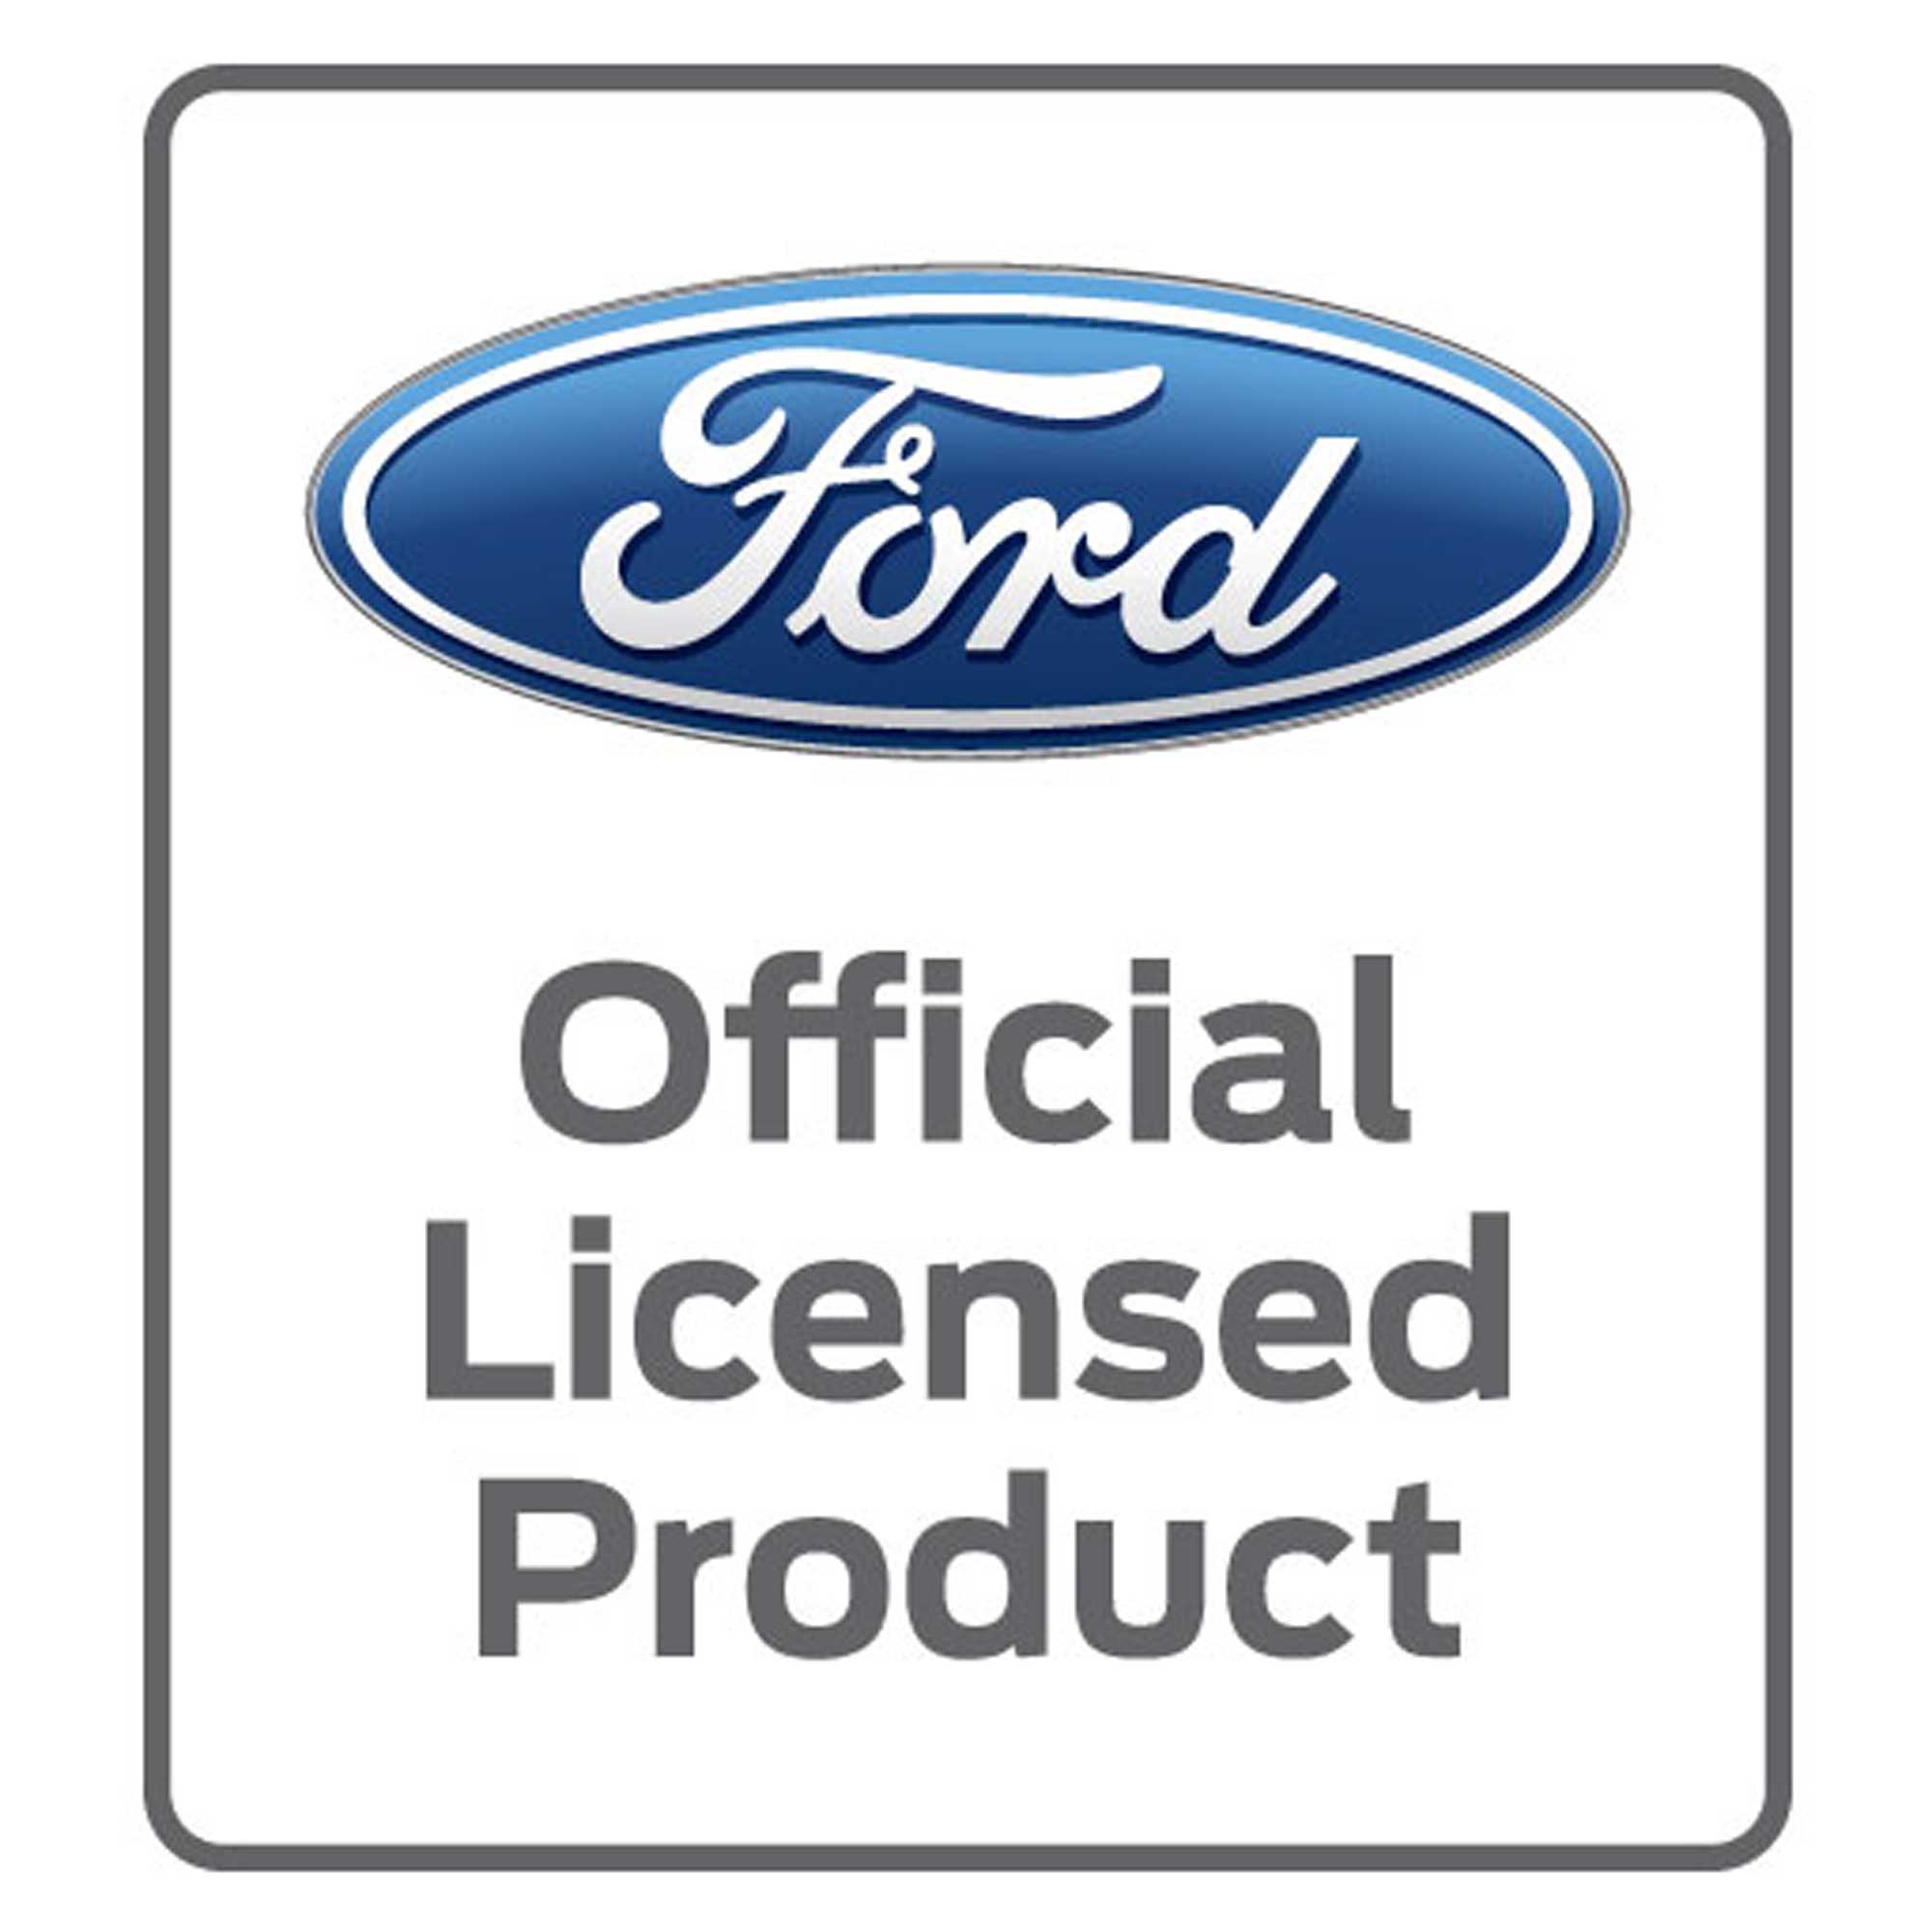 Official Ford Logo - Richbrook Officially Licensed Ford Logo Seat Cover Wearing